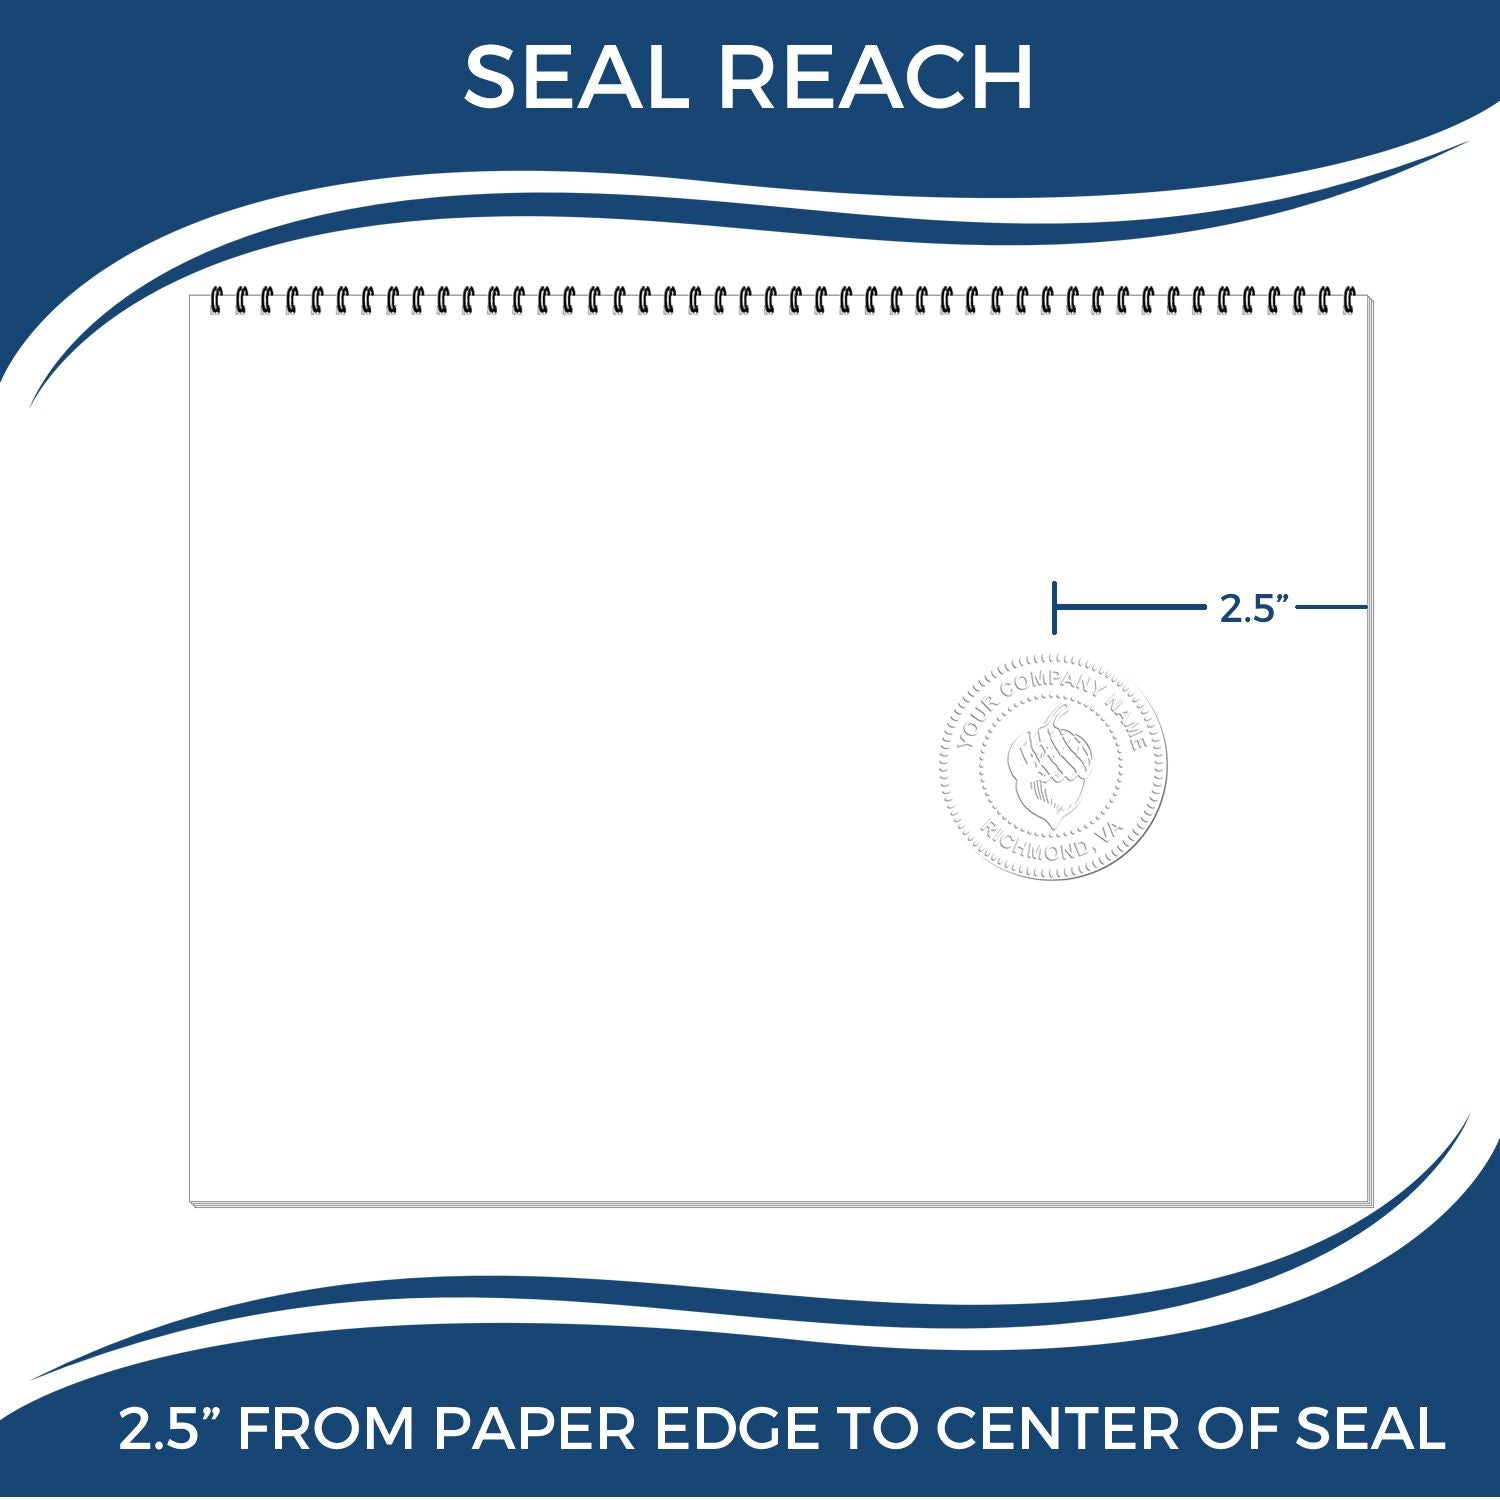 An infographic showing the seal reach which is represented by a ruler and a miniature seal image of the State of North Carolina Long Reach Architectural Embossing Seal